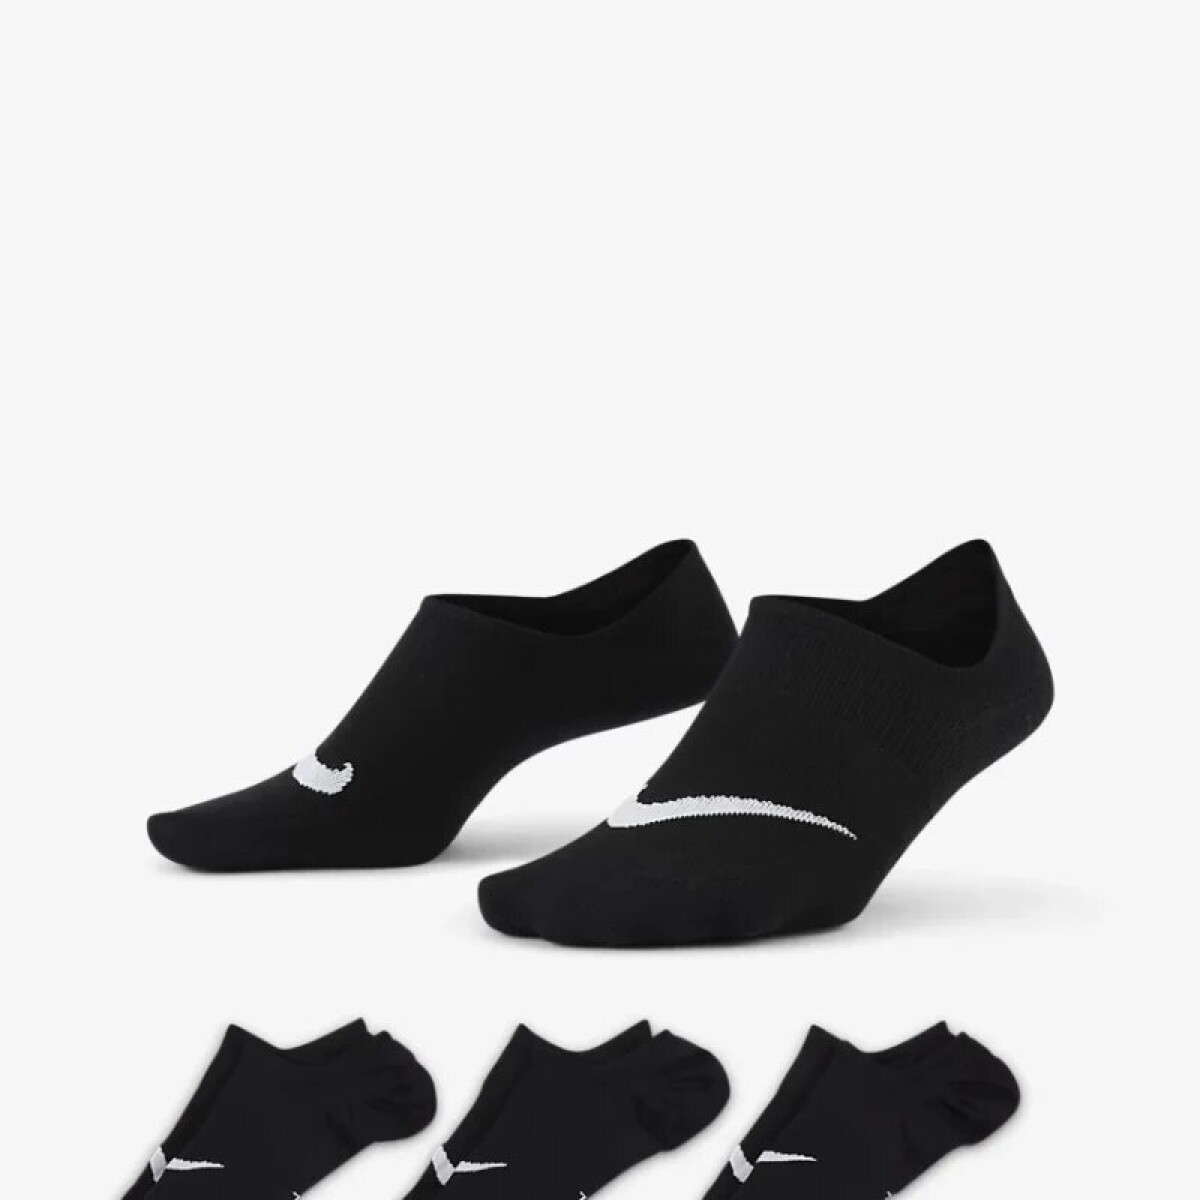 MEDIAS NIKE MUJER INVISIBLE EVERYDAY PLUS LIGHTWEIGHT 3 PACK - MEDIAS NIKE EVERYDAY PLUS 3 PACK 